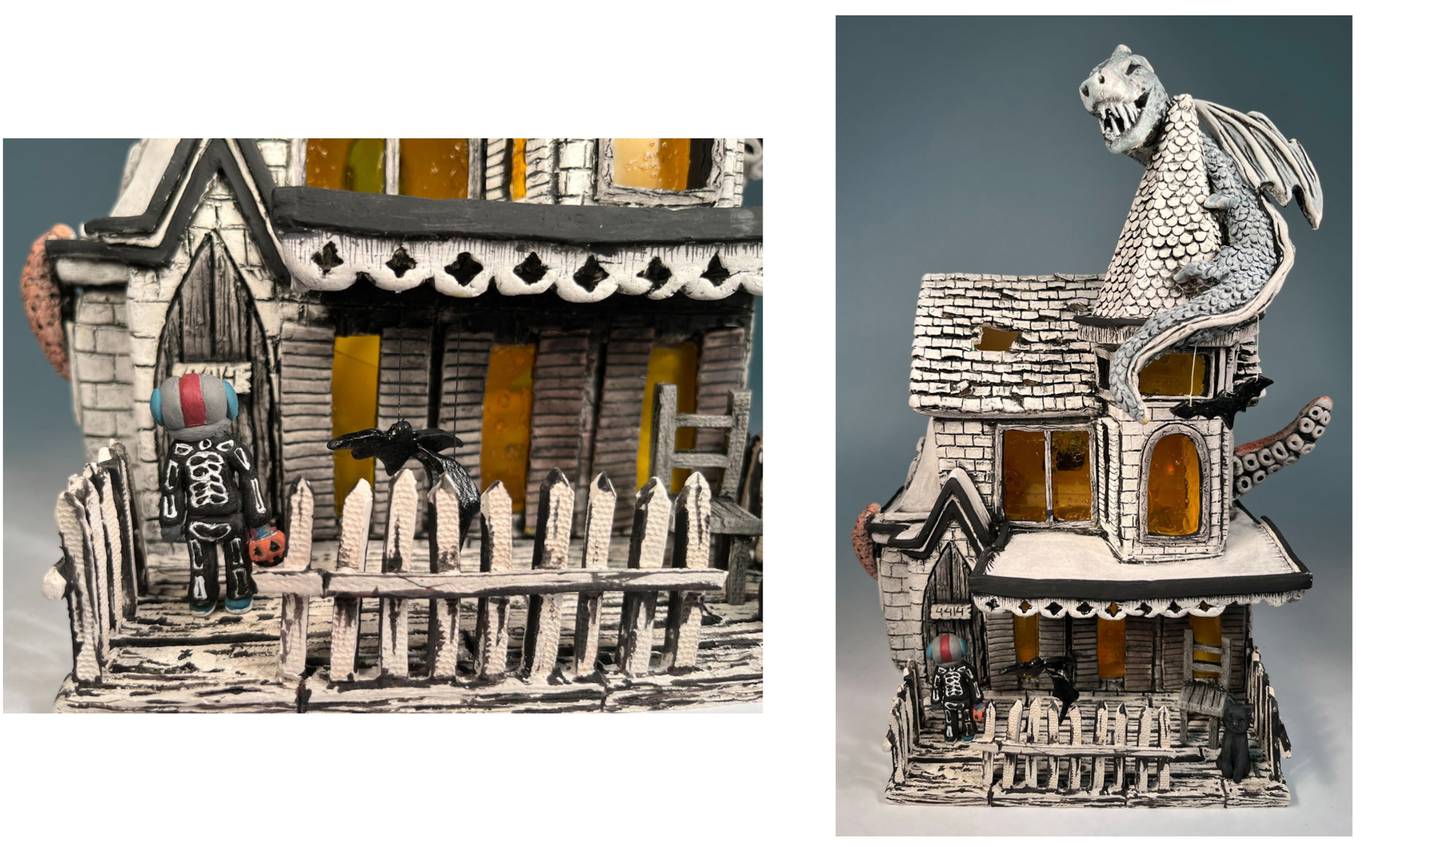 Vivianne Angulo, a senior at Plainfield South High School, earned a silver award from Scholastic Art & Writing Awards for her ceramics and glass piece called “Trick or Treat."